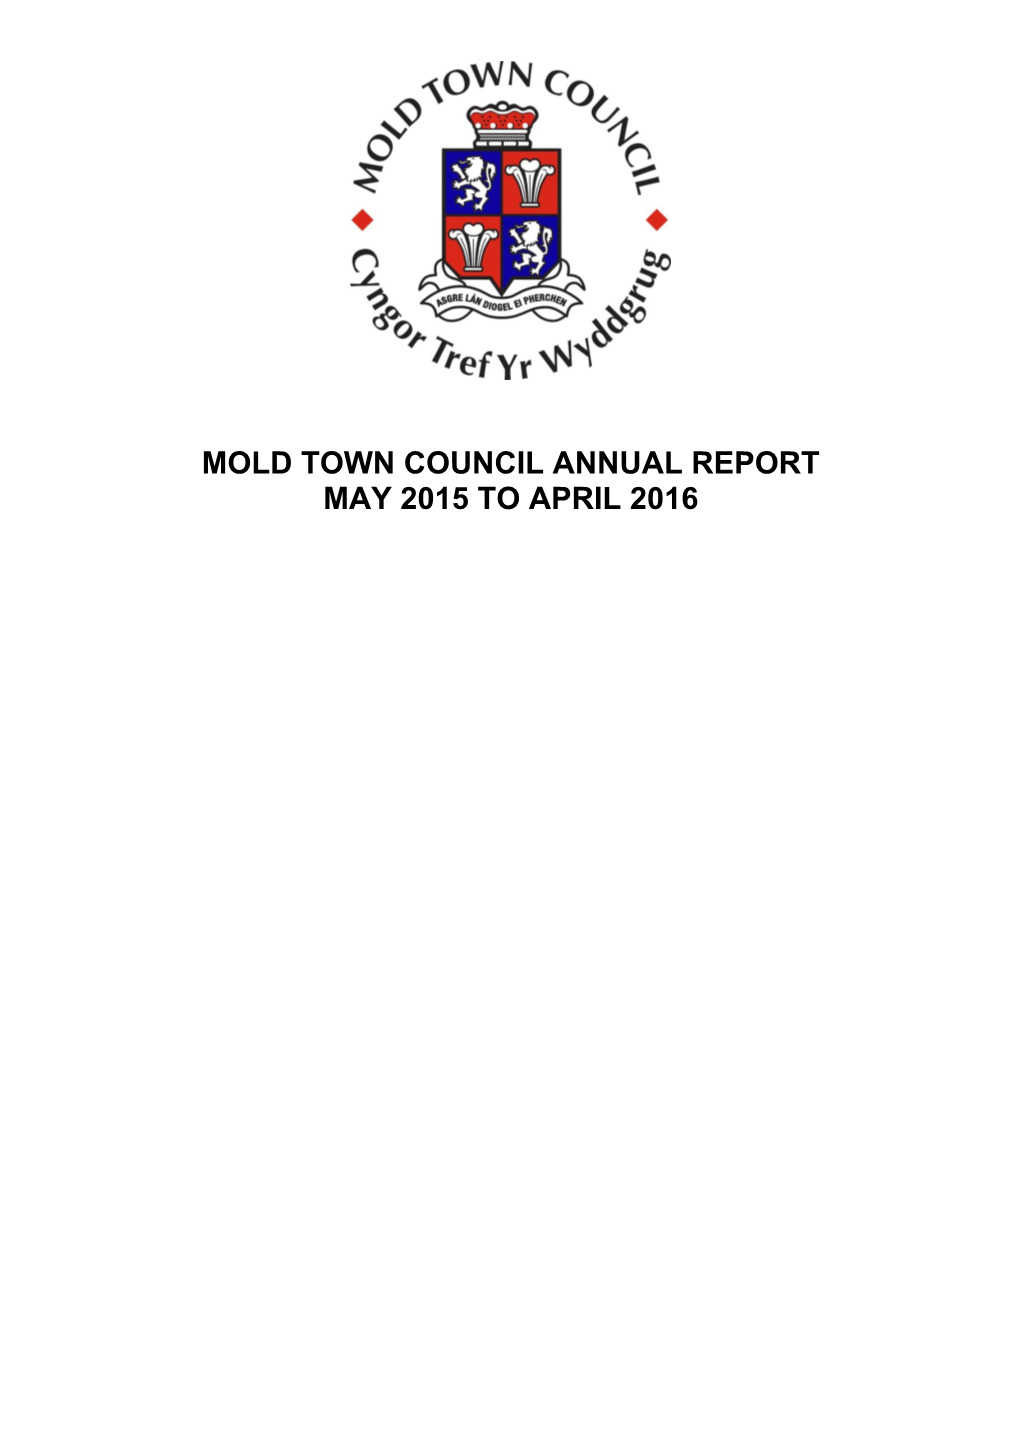 Mold Town Council Annual Report